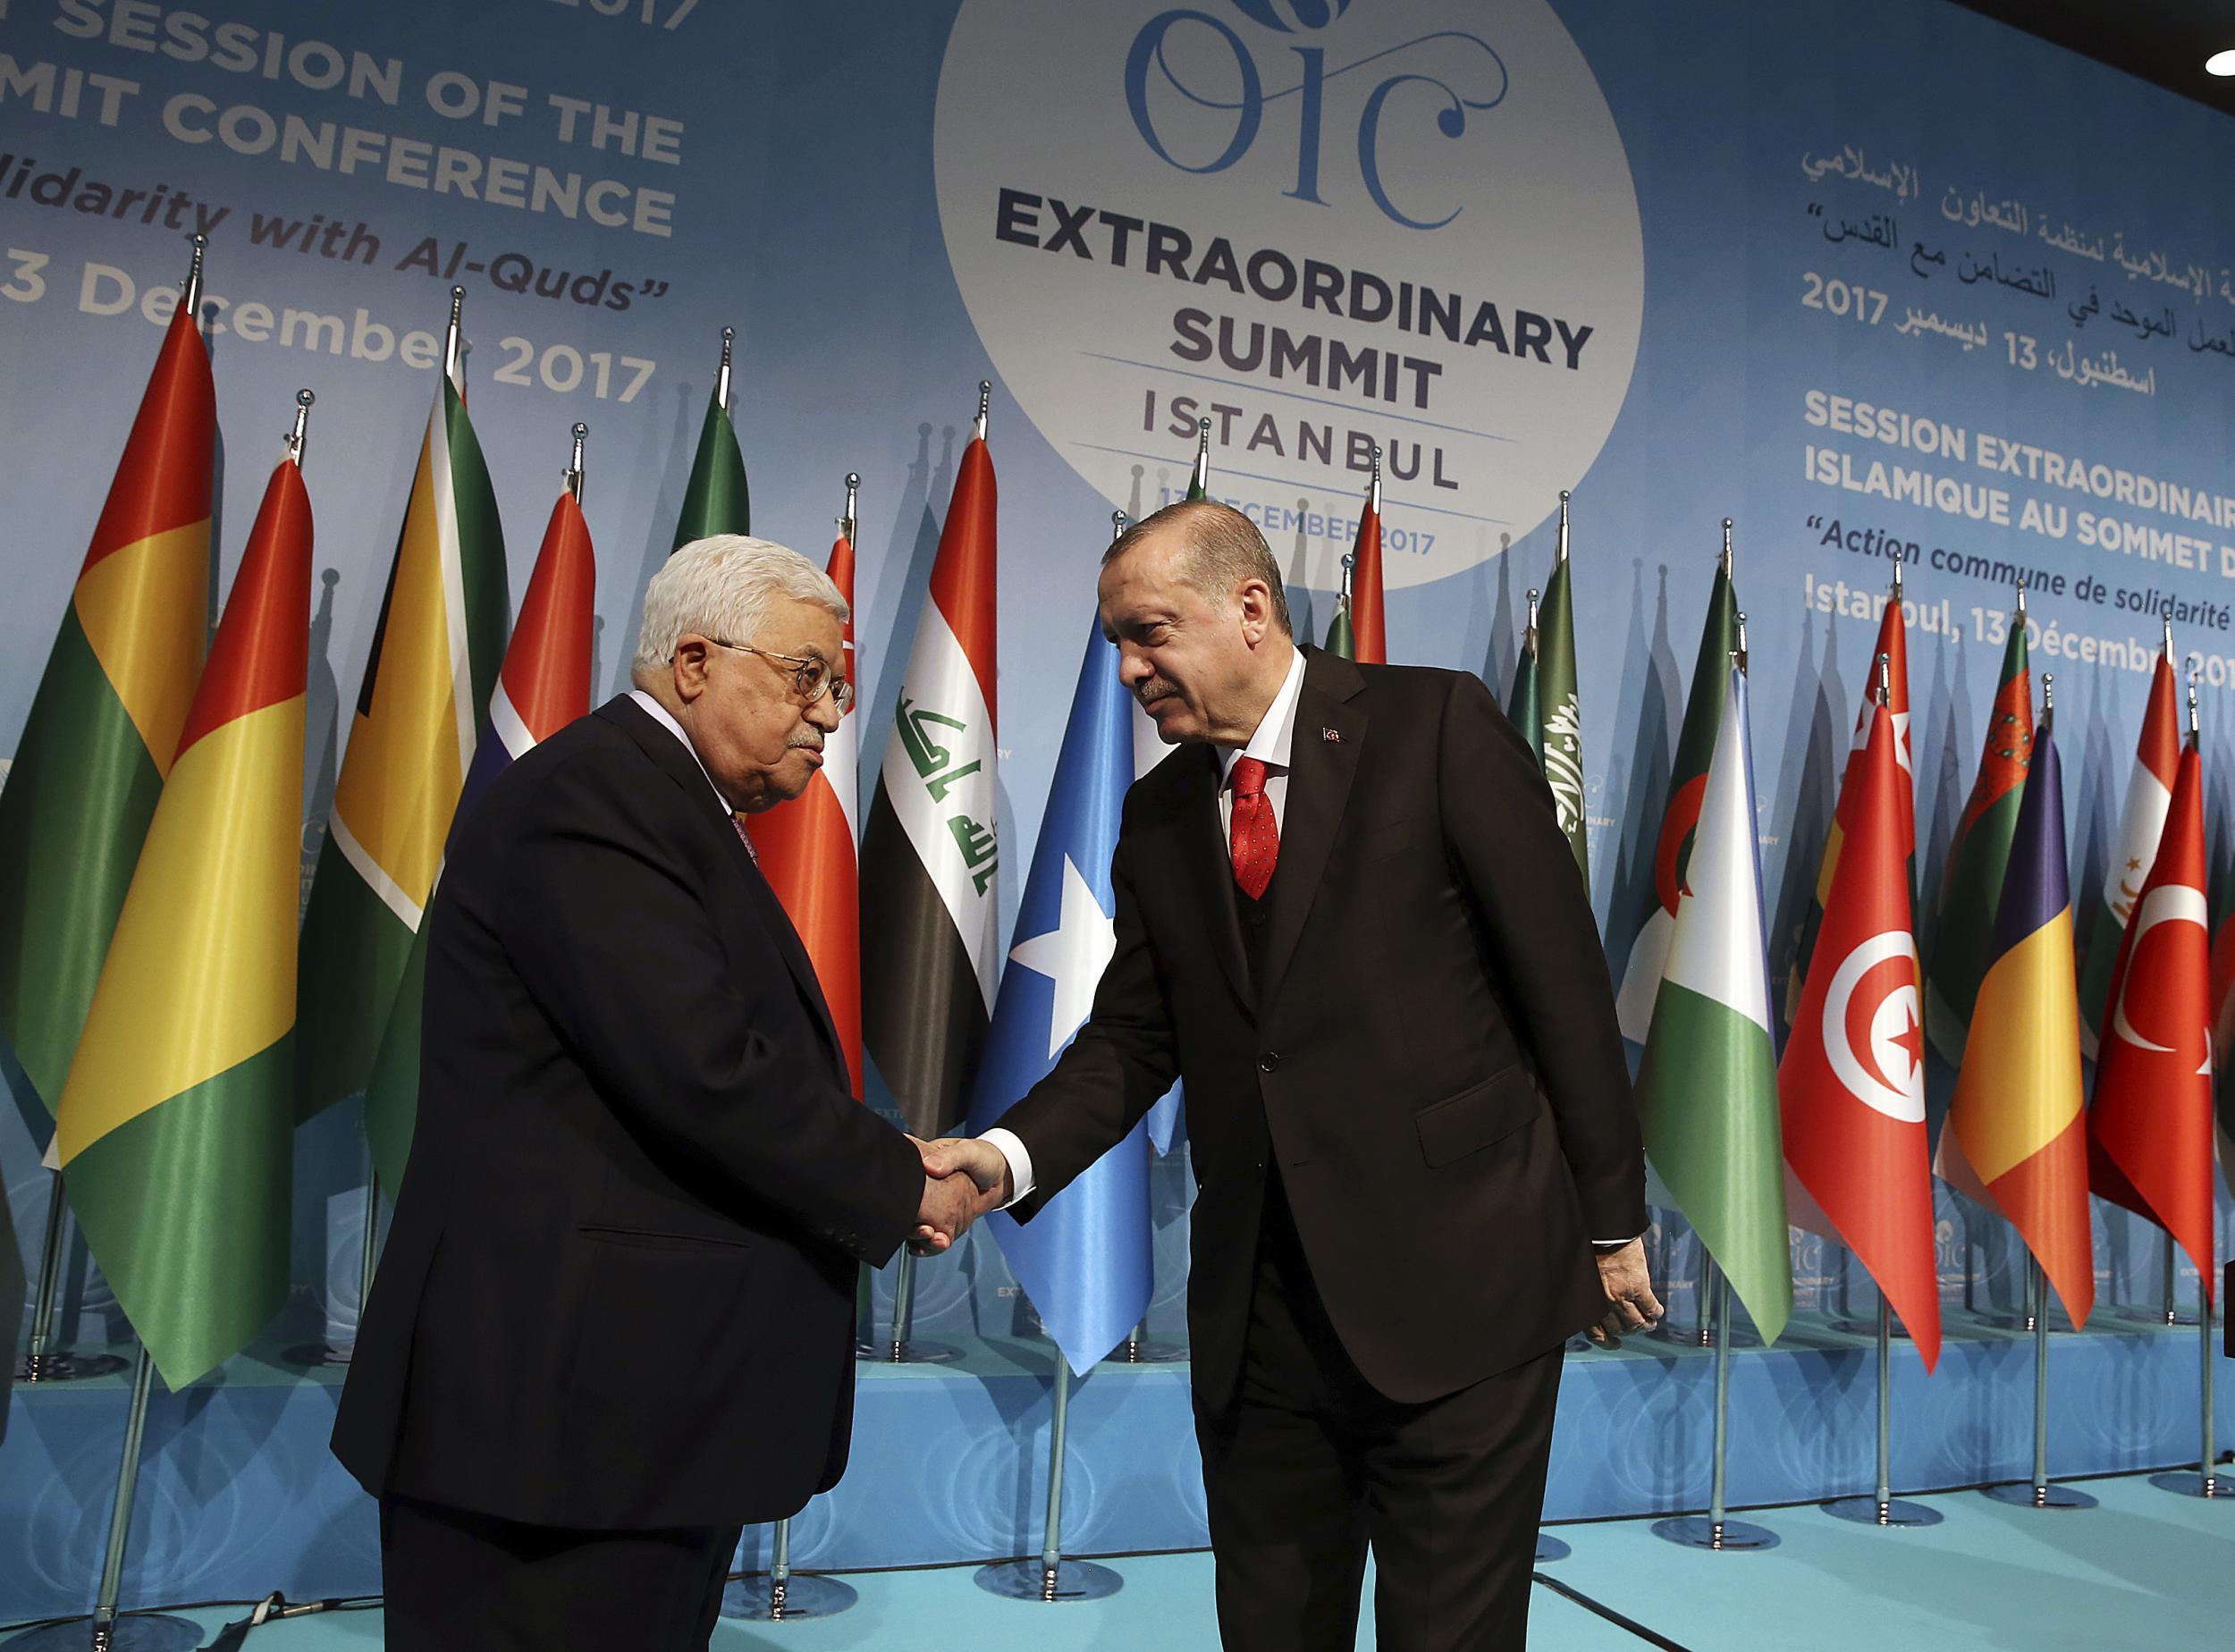 Turkish President Erdogan (right, with his Palestine counterpart Mahmoud Abbas) at least declared that Washington could no longer be a negotiator